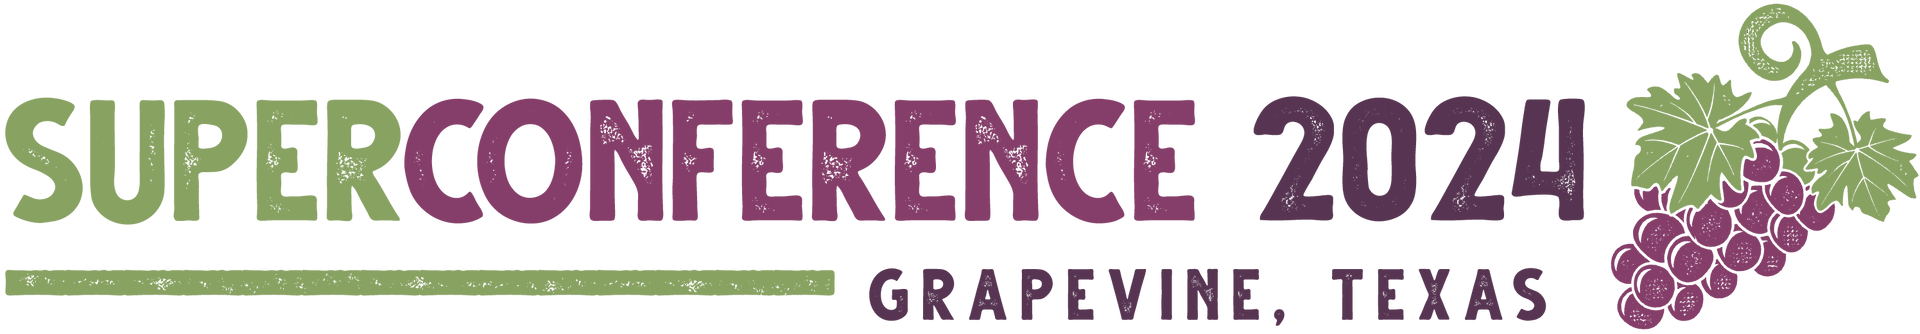 The logo for the superconference 2021 in grapevine , texas